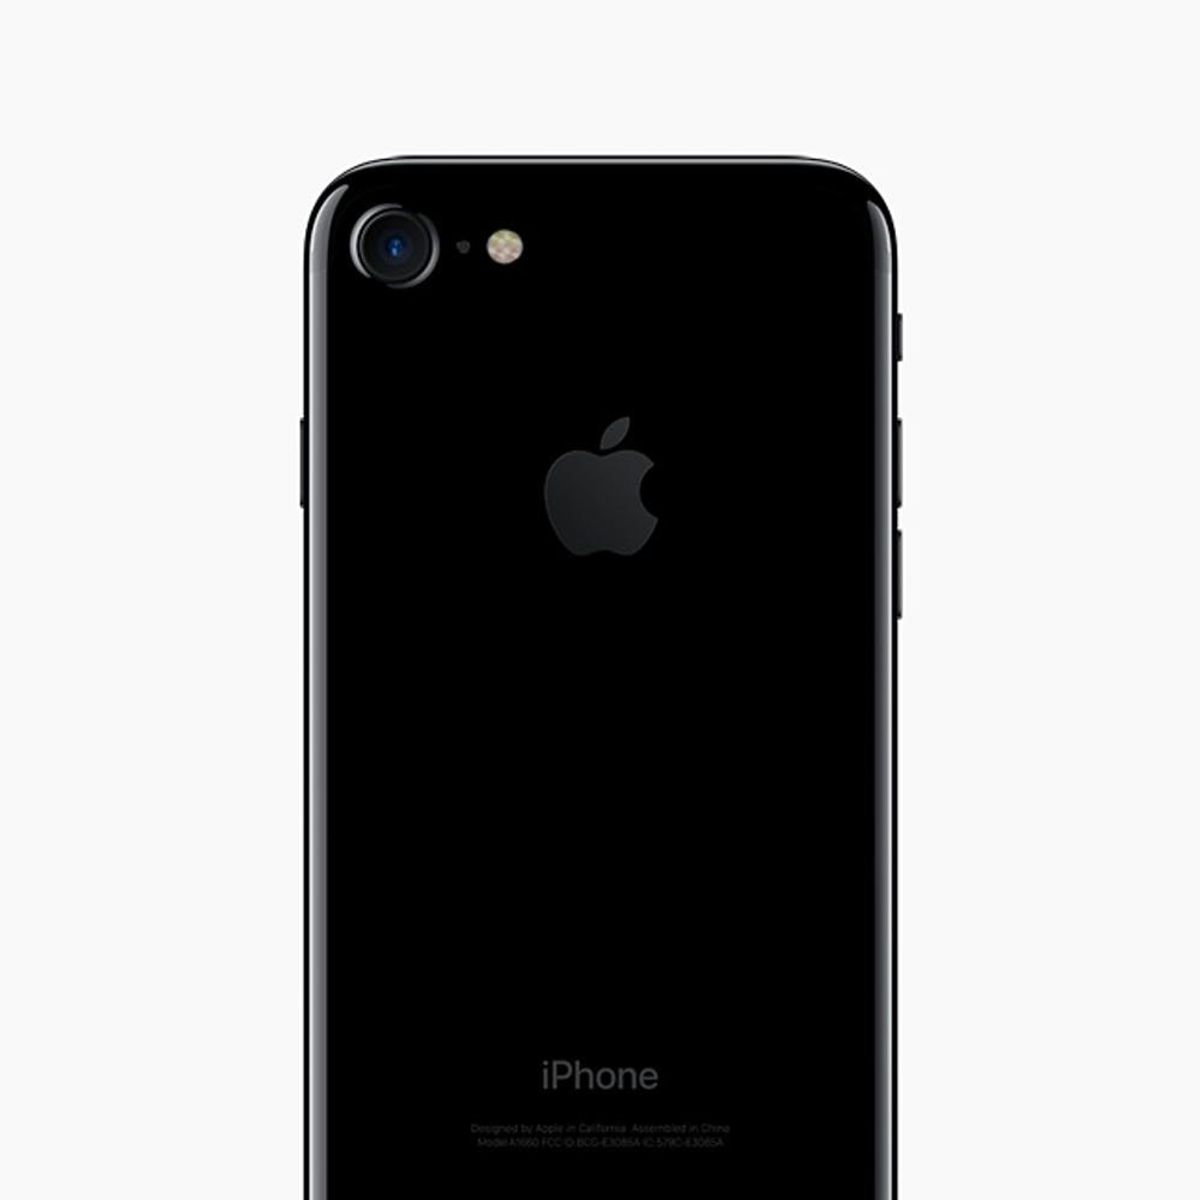 Bad News: The iPhone 7 Has Super Short Battery Life